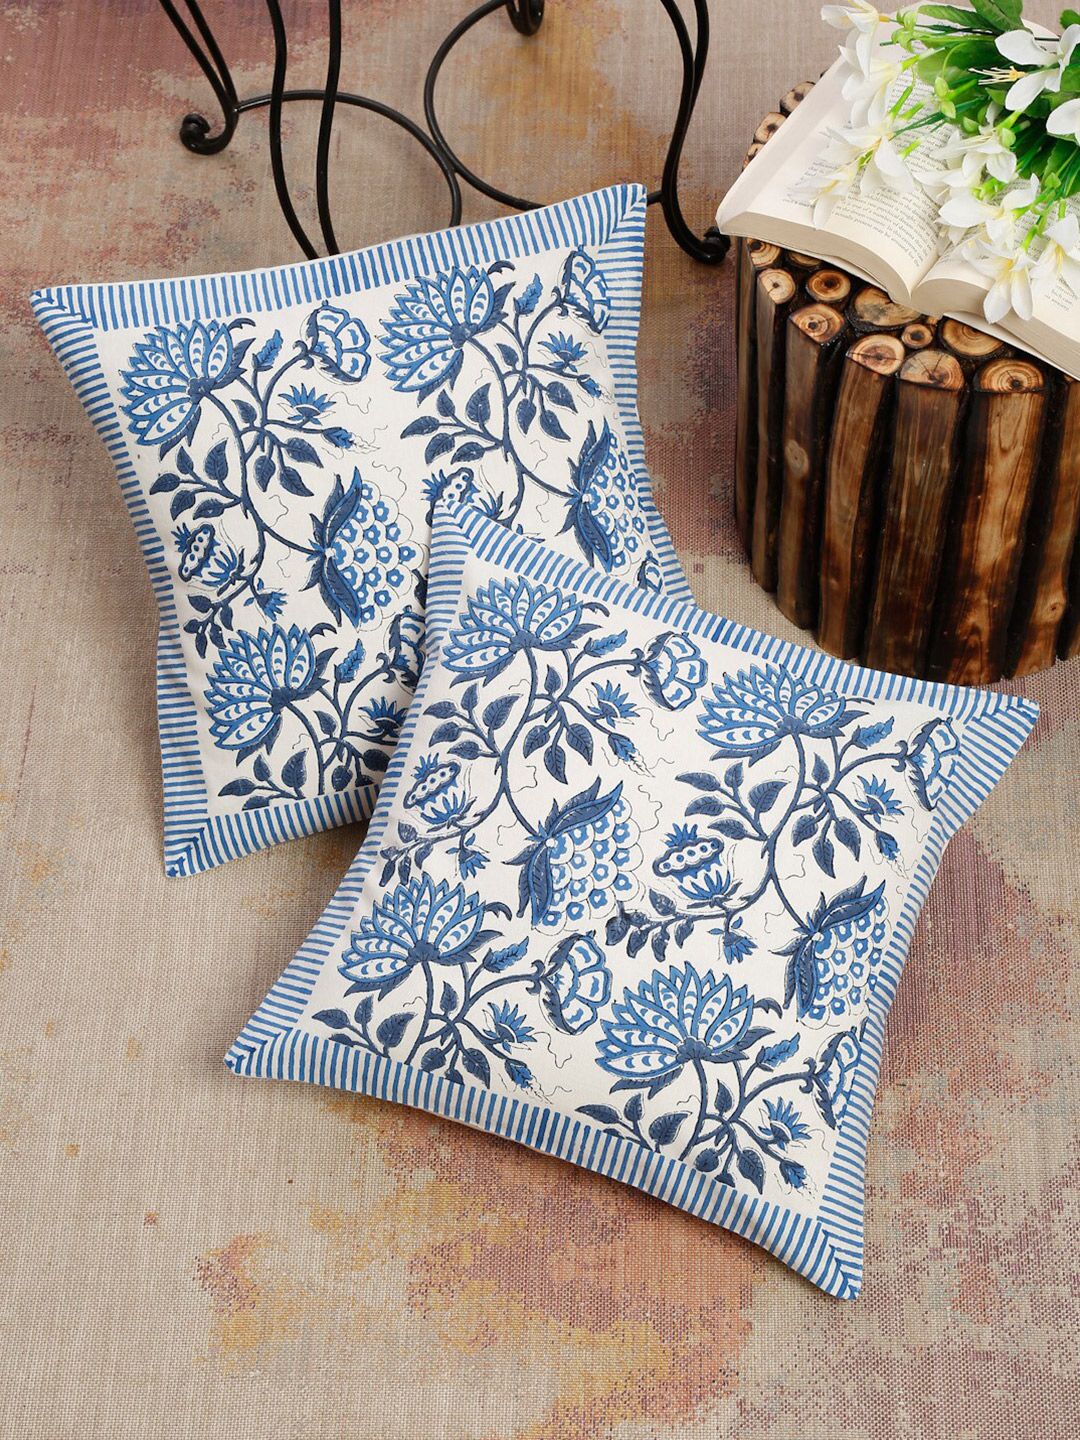 EK BY EKTA KAPOOR Set of 2 Floral Square Cotton Cushion Covers Price in India